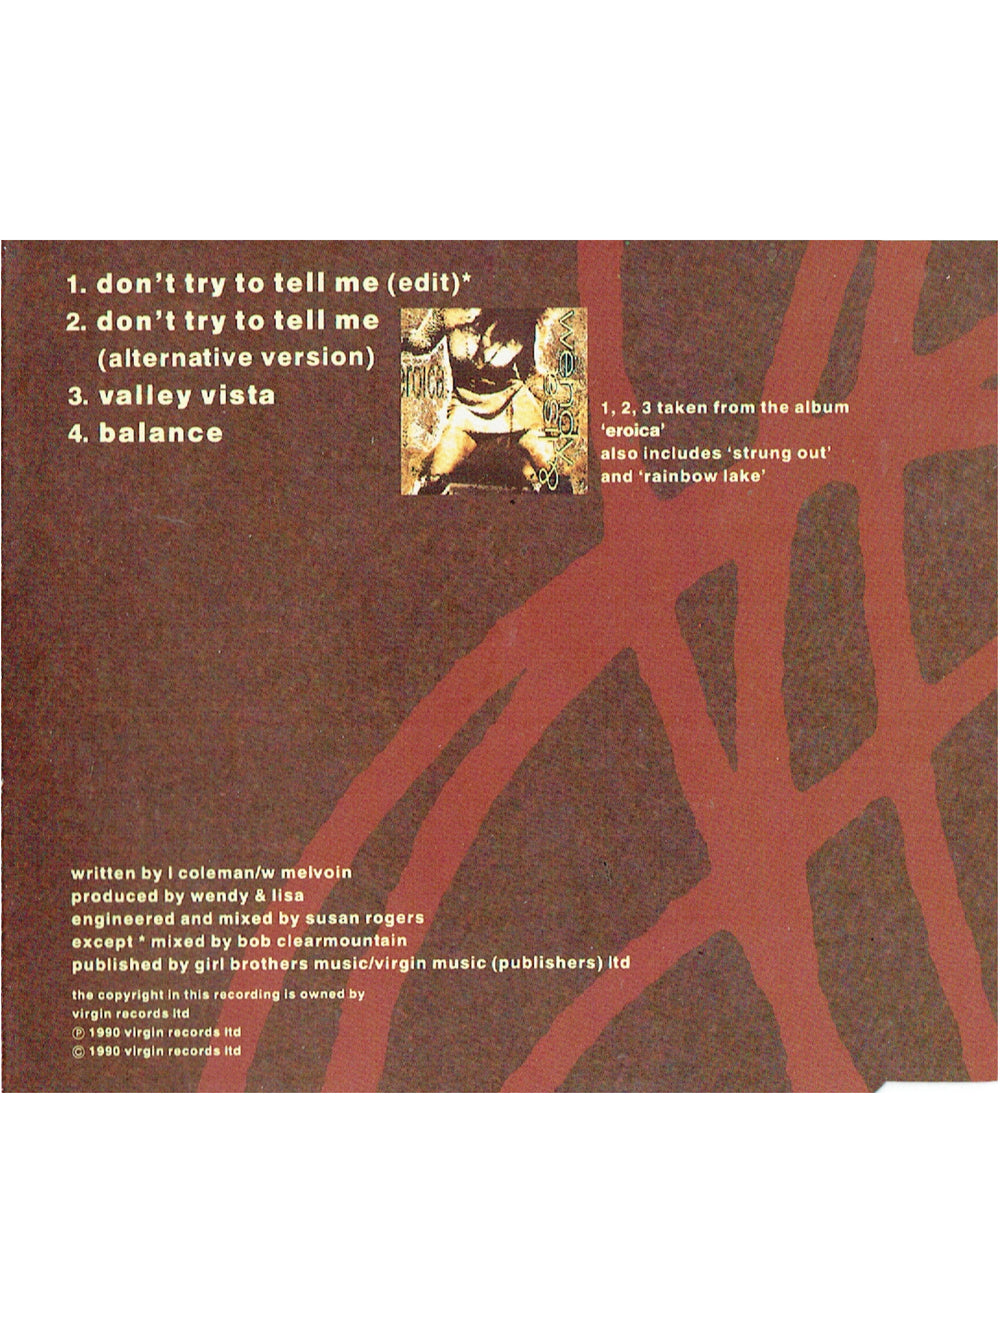 Prince – Wendy & Lisa Don't Try To Tell Me CD Single 1990 UK Release Eroica Prince